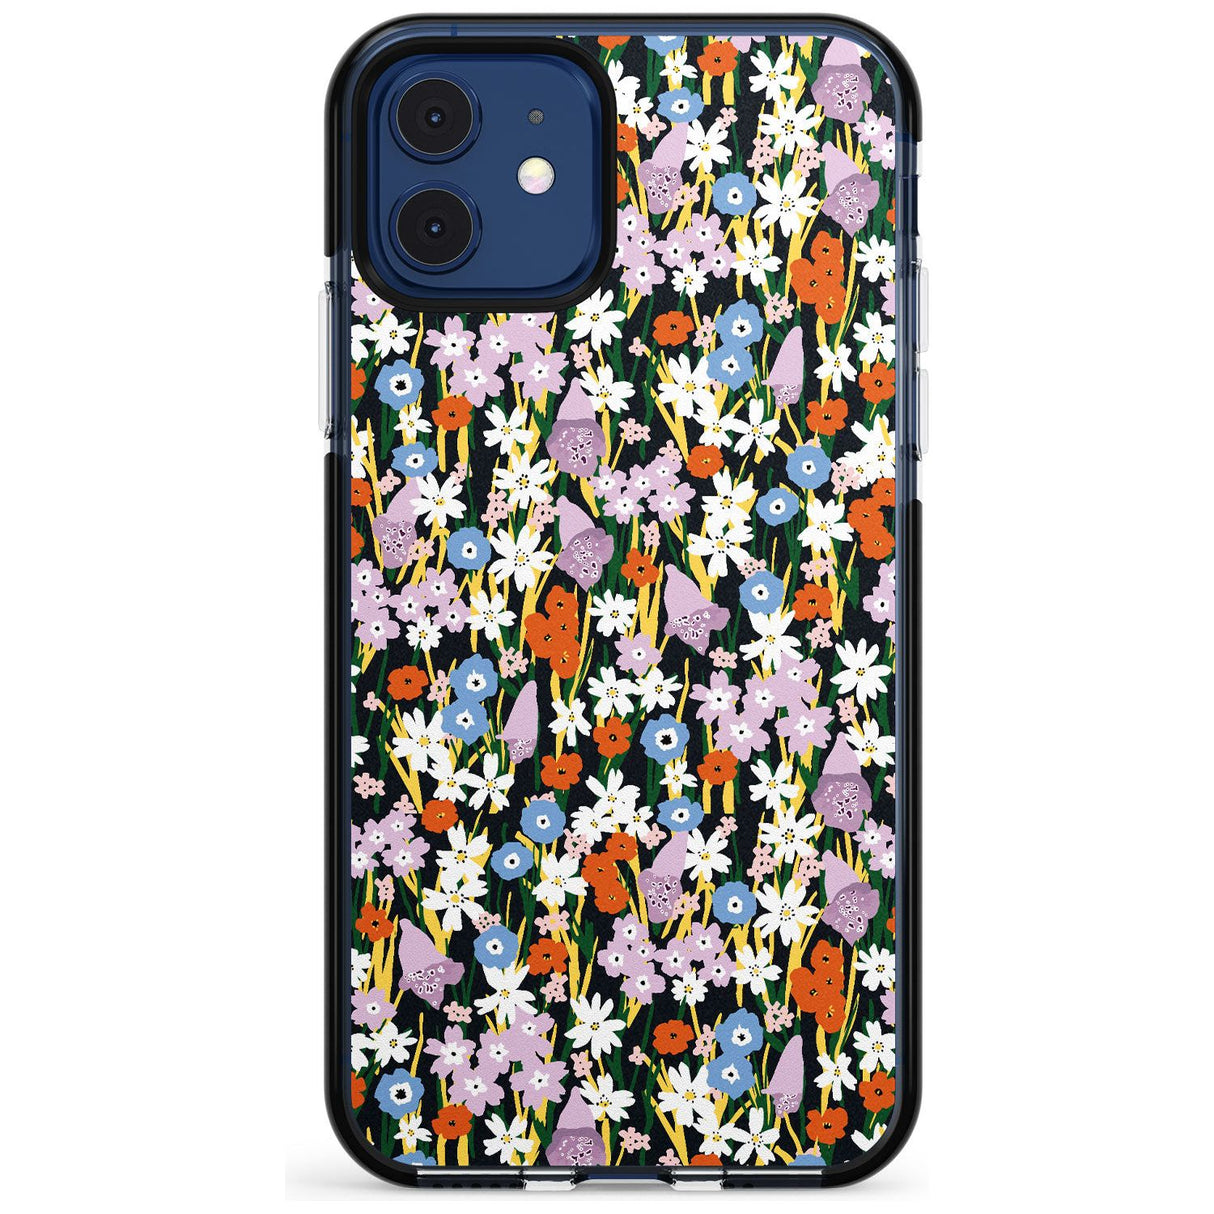 Energetic Floral Mix: Solid Pink Fade Impact Phone Case for iPhone 11 Pro Max